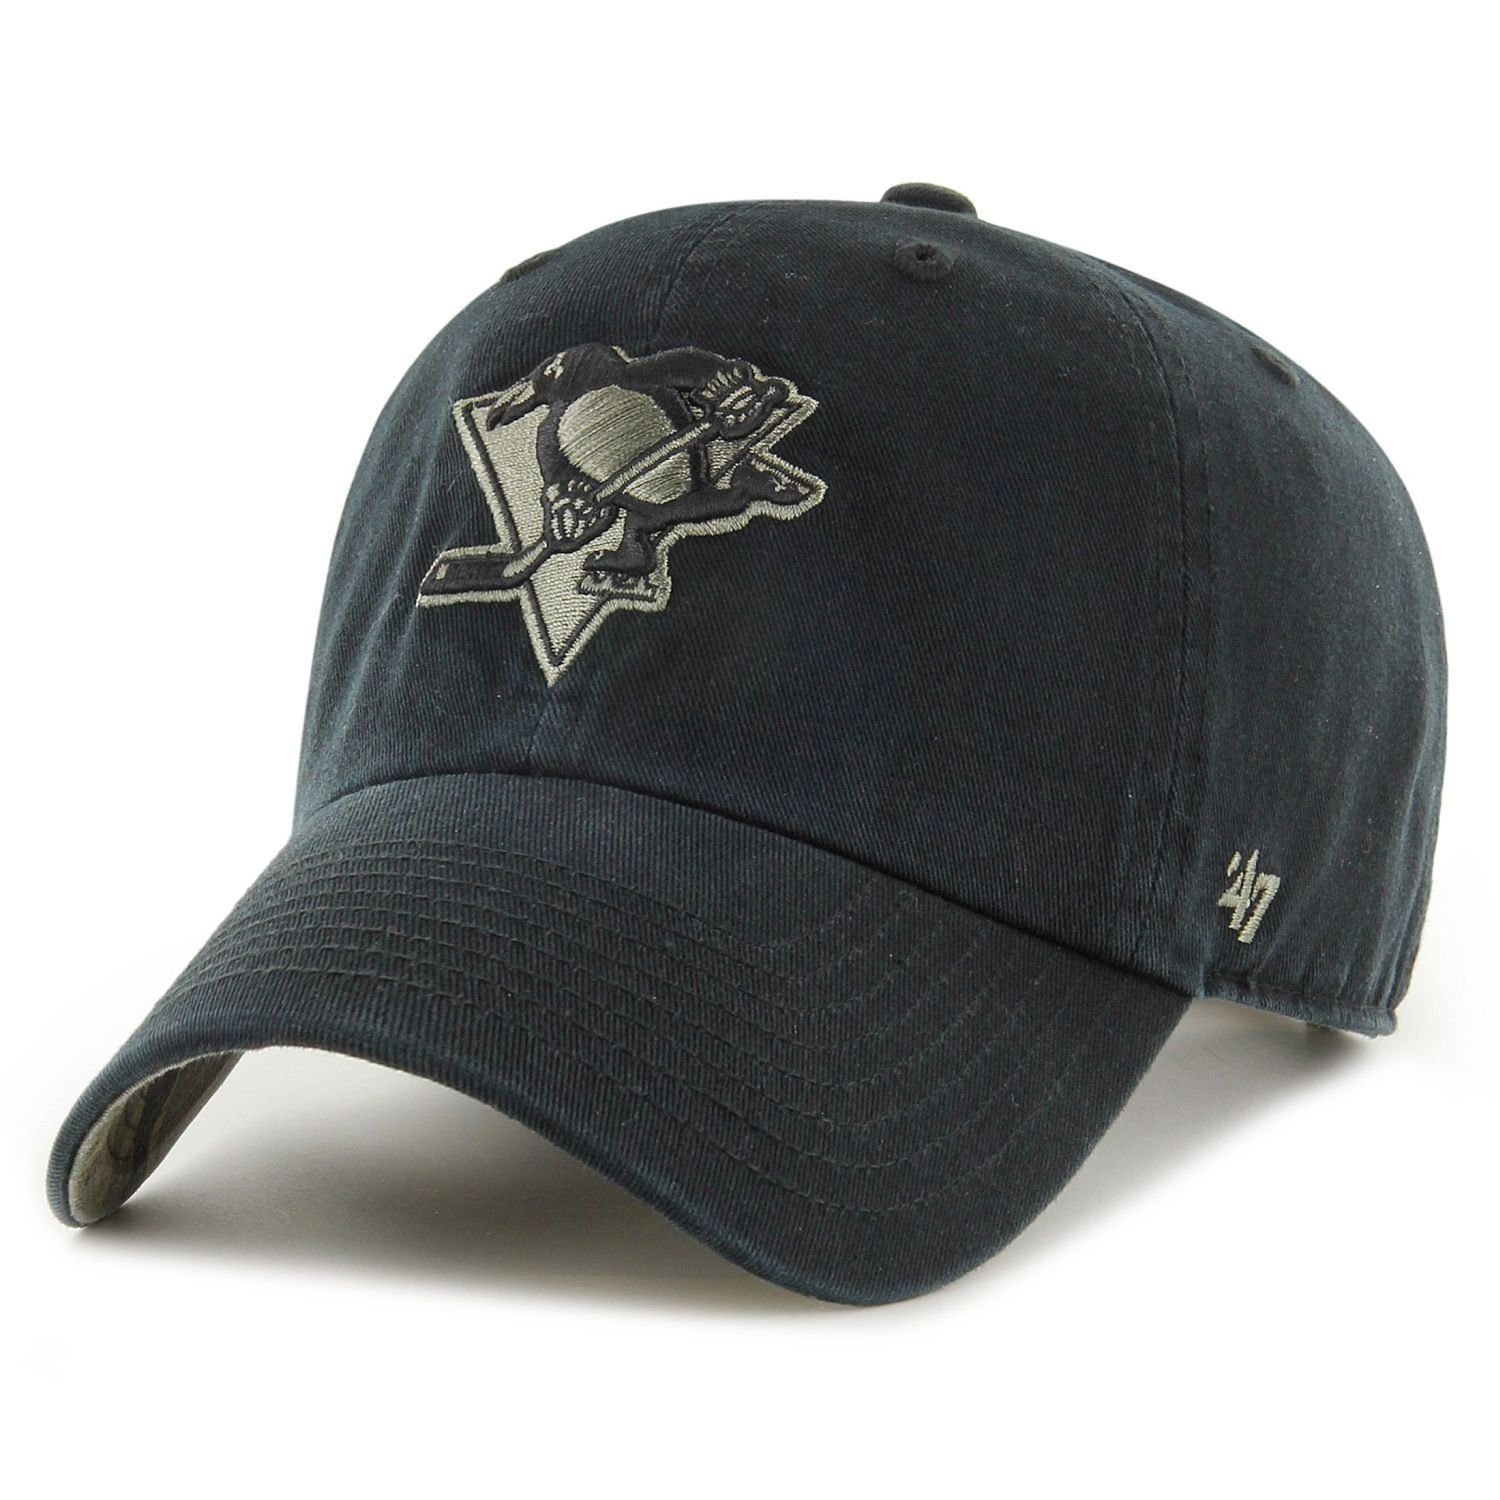 '47 Brand Trucker Cap Relaxed Fit CLEAN UP Pittsburgh Penguins